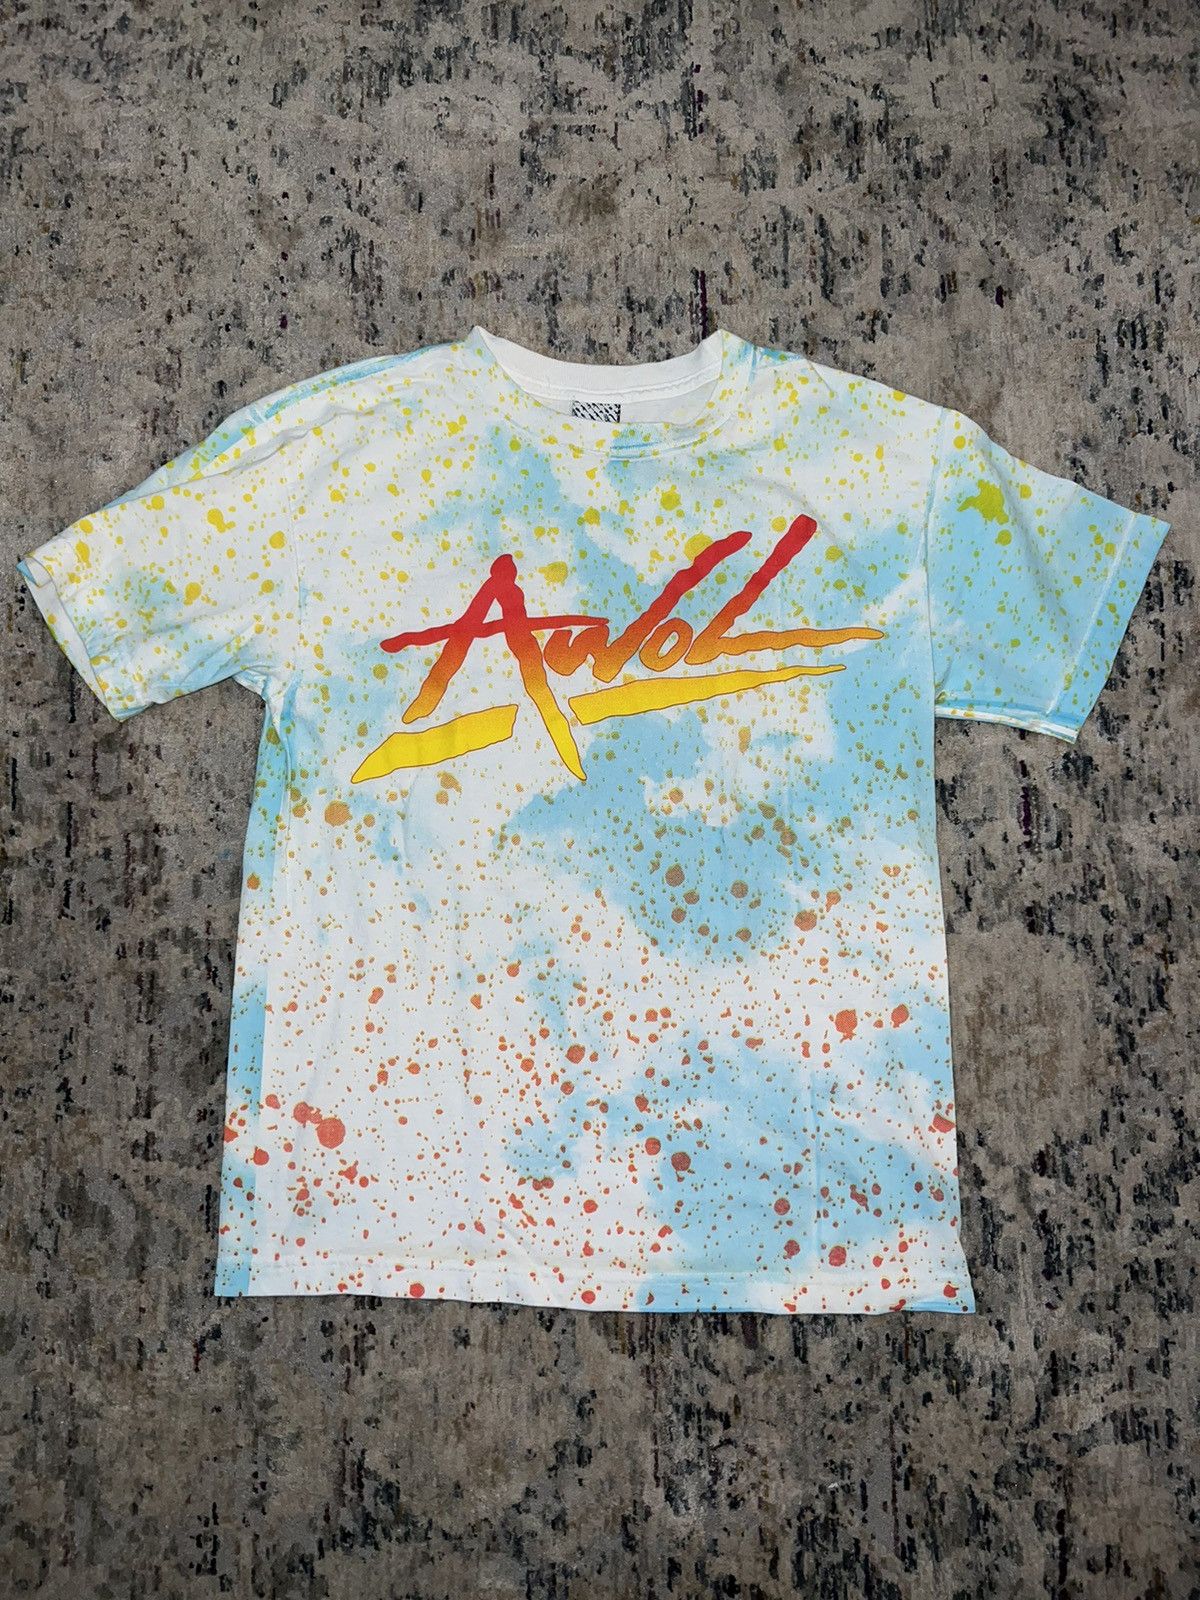 Vintage Rogue Status - Awol Tee - Size M | Grailed